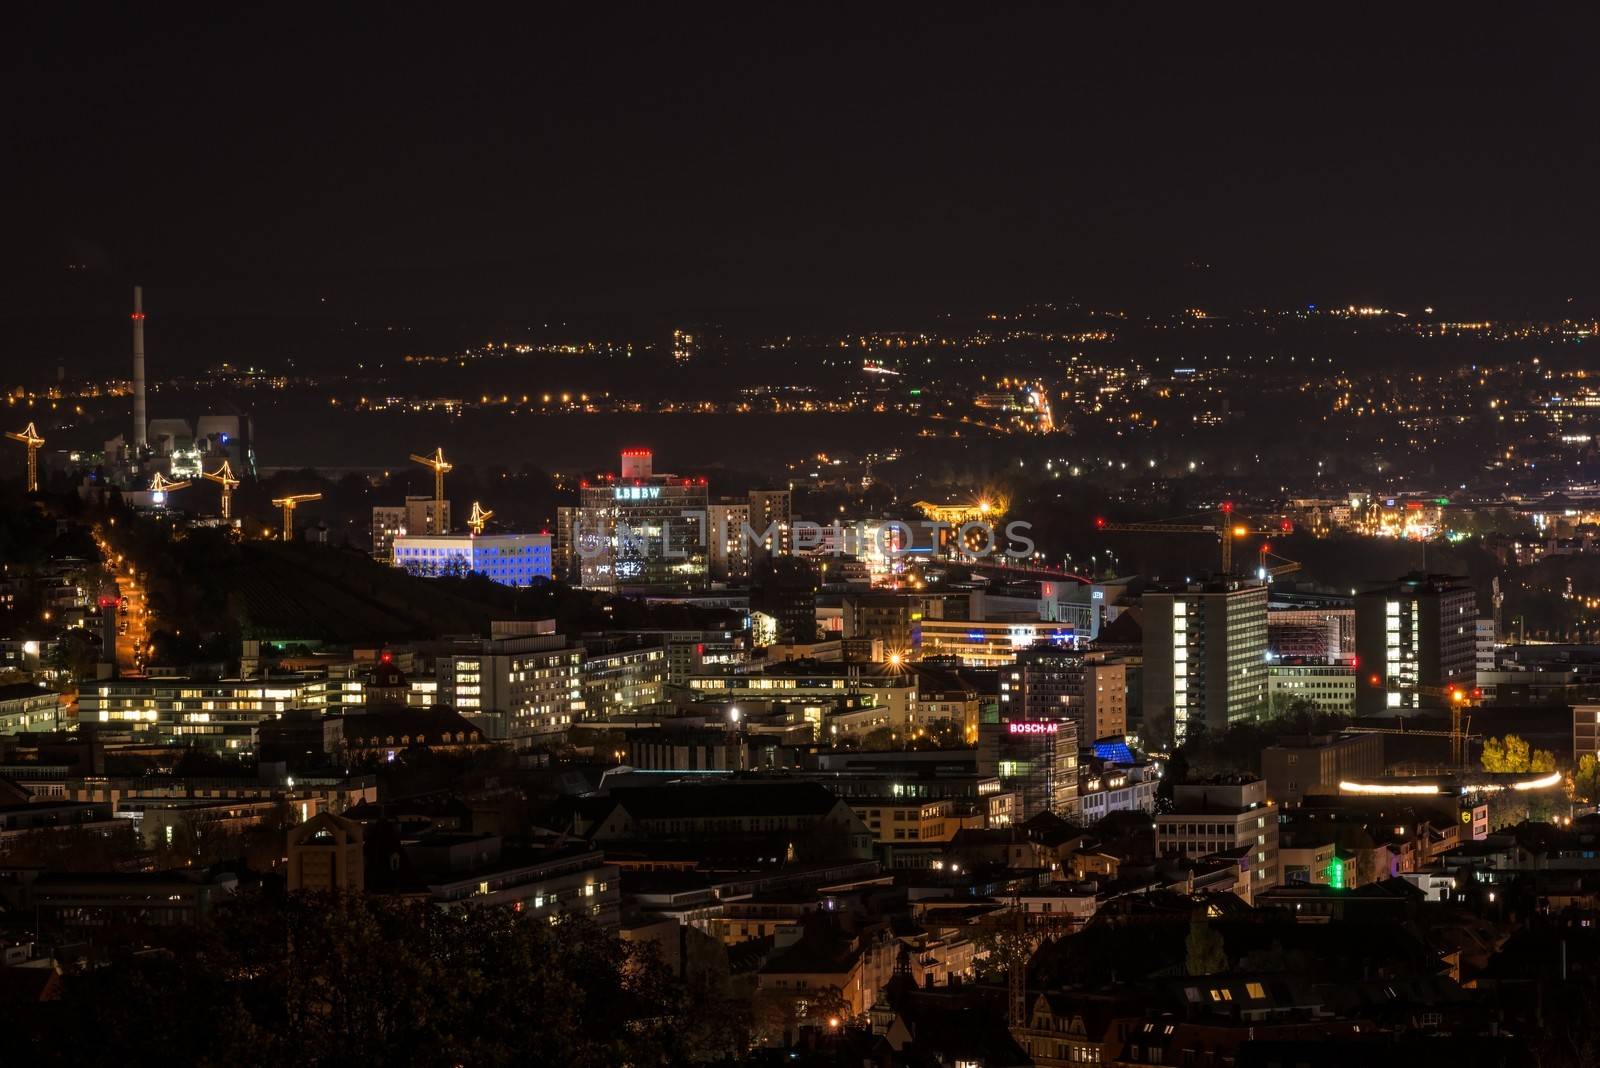 STUTTGART, GERMANY - NOVEMBER 9, 2013: Stuttgart panorama at night as seen from the western areas of the city on November 9, 2013 in Stuttgart, Germany. The Wilhelm-Charlotten platform was renovated in 2012 and offers a great view over the city by day and especially by night.